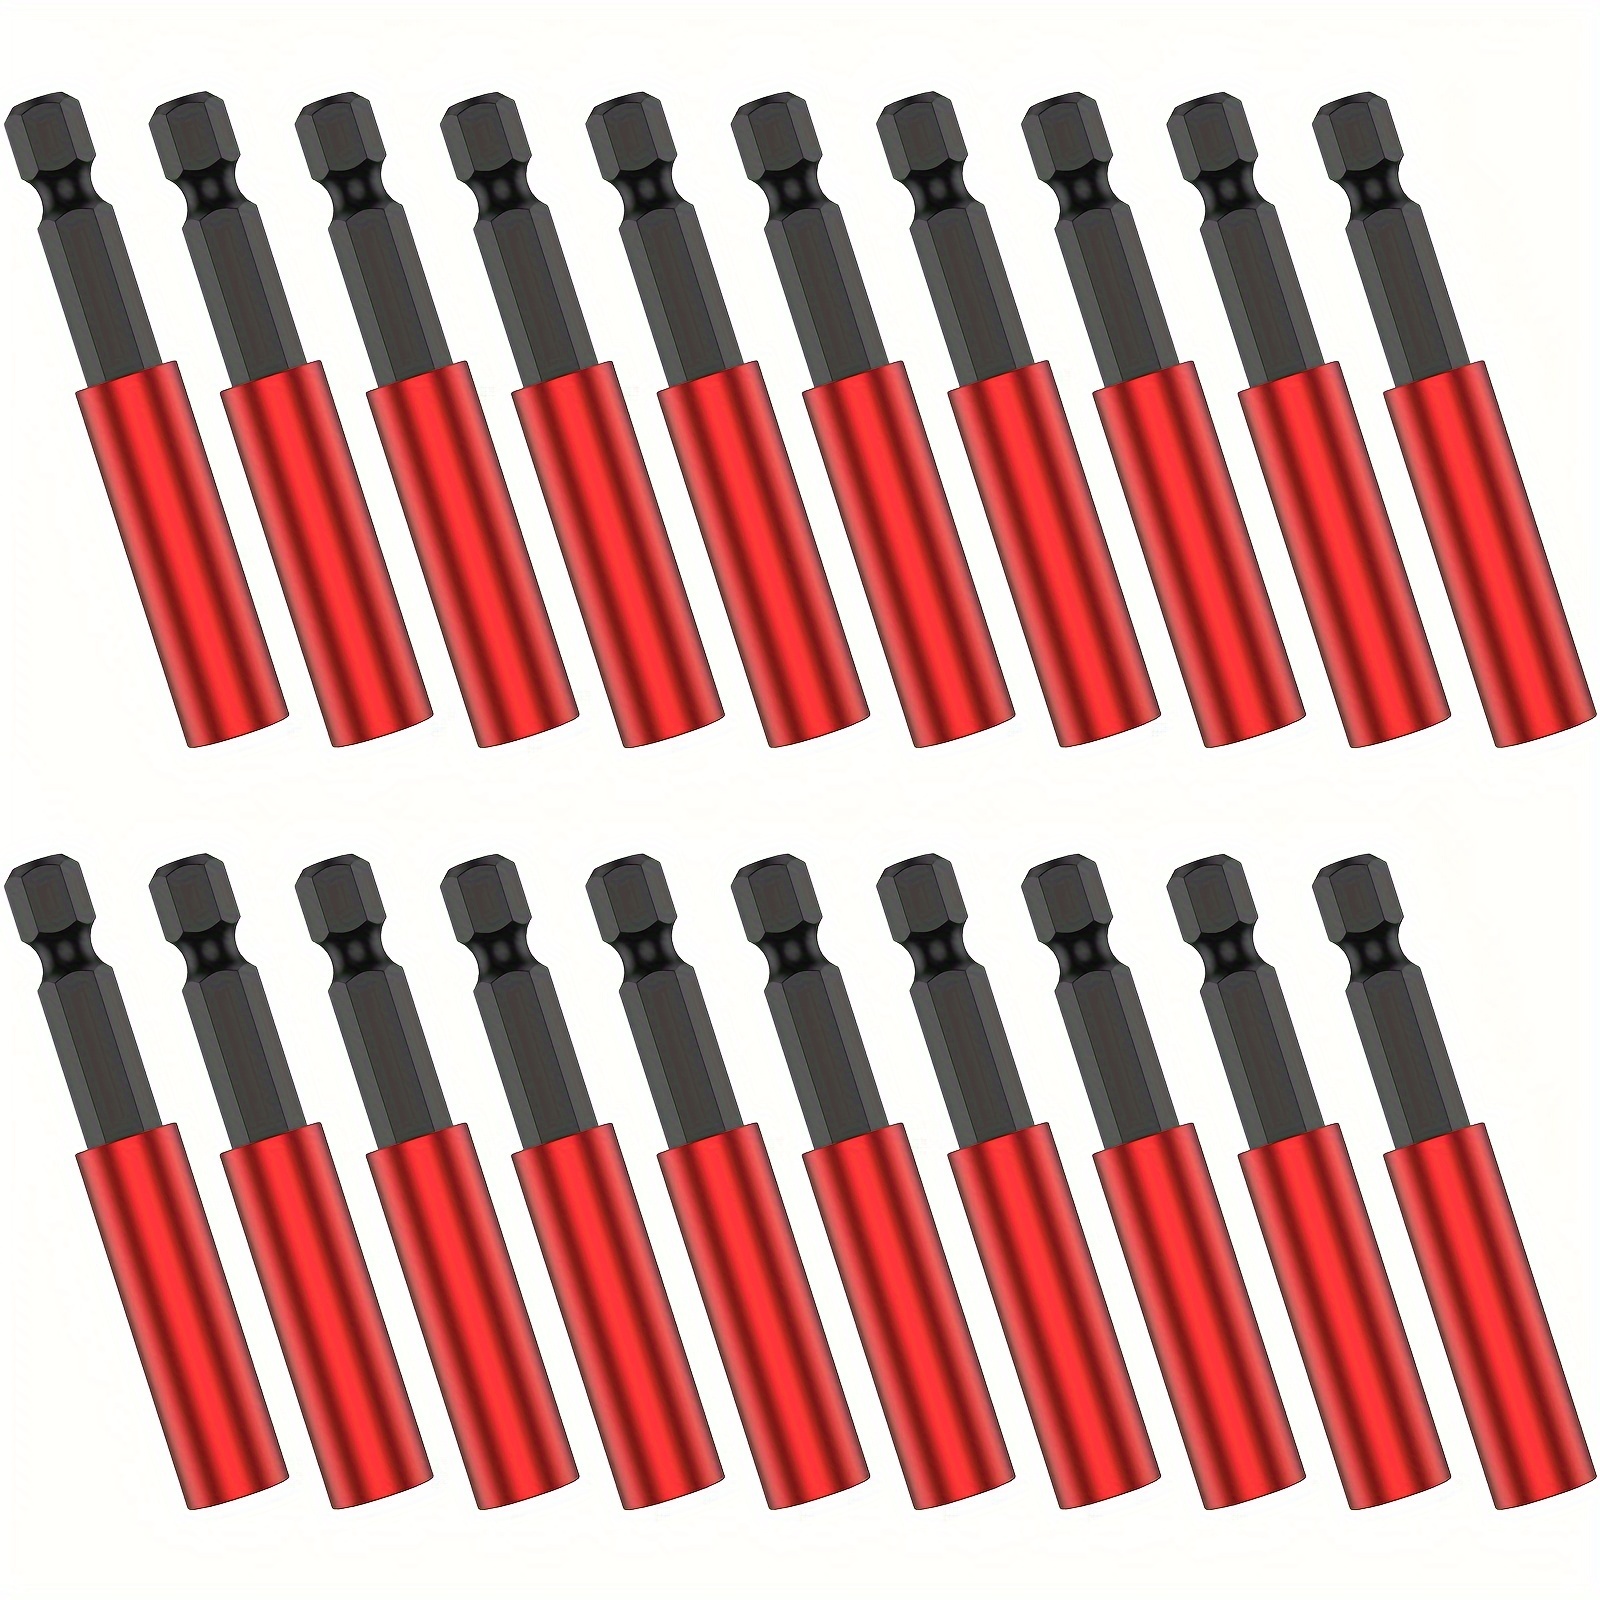 

20pcs Extension Bit Holder Magnetic Screwdriver Extension Quick Change 1/4inch Hex Shank Drill Bit Extension Drill Bit Tip Holder Aluminum Alloy Drill Bit Extension Bar For Nuts